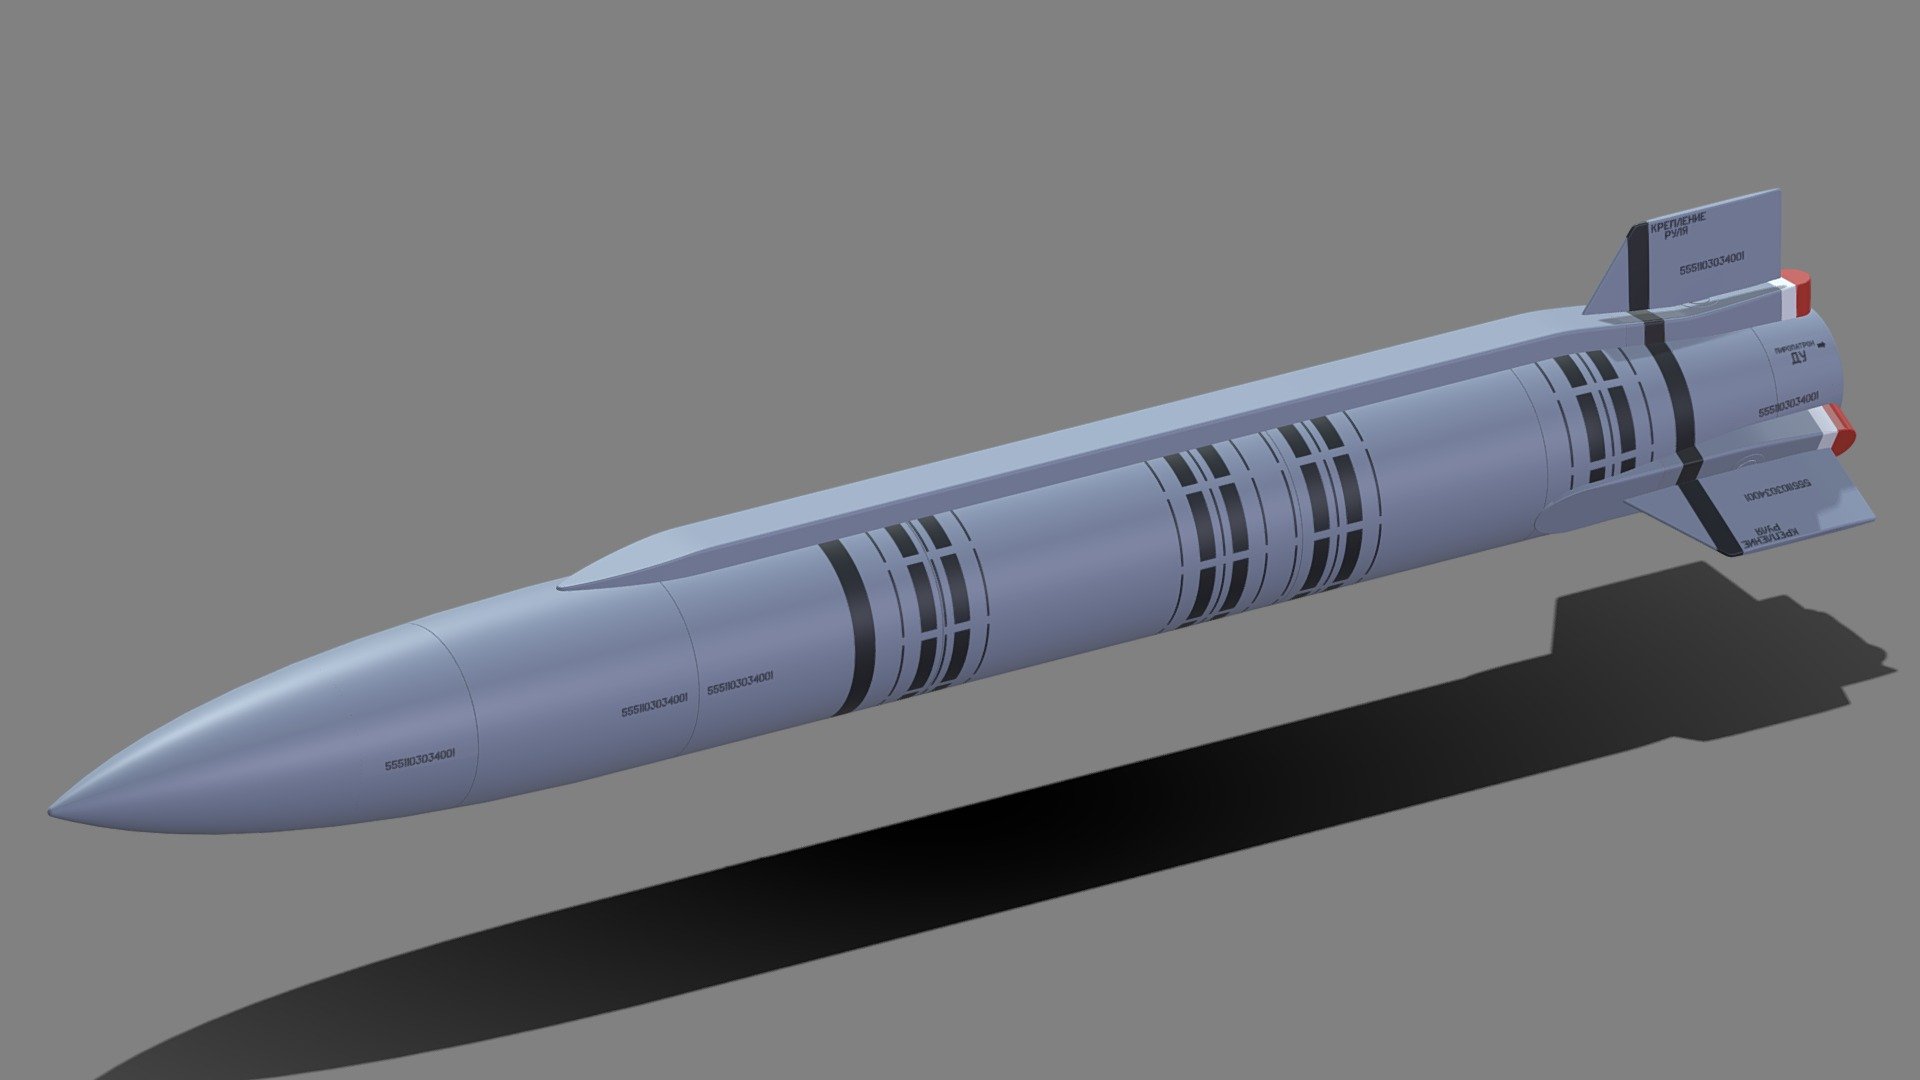 Kh-15 (AS-16) Kickback aeroballistic missile modeled by selena3D. Link to to the model: -link removed- - Kh-15 (AS-16) Kickback aeroballistic missile - 3D model by Jeyhun1985 3d model